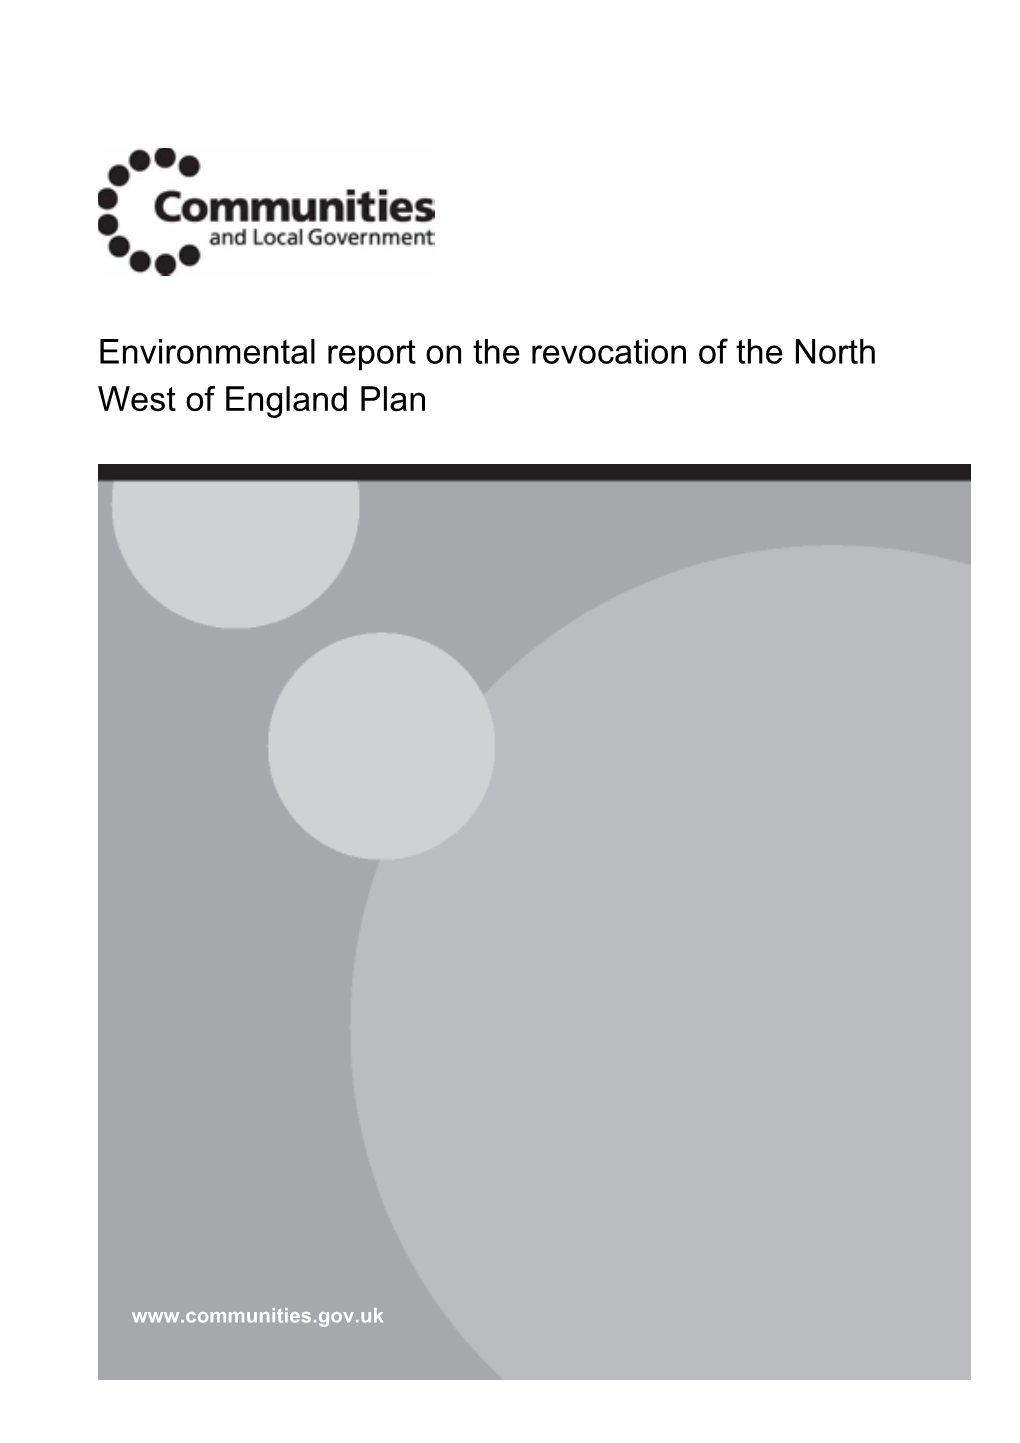 Environmental Report on the Revocation of the North West of England Plan